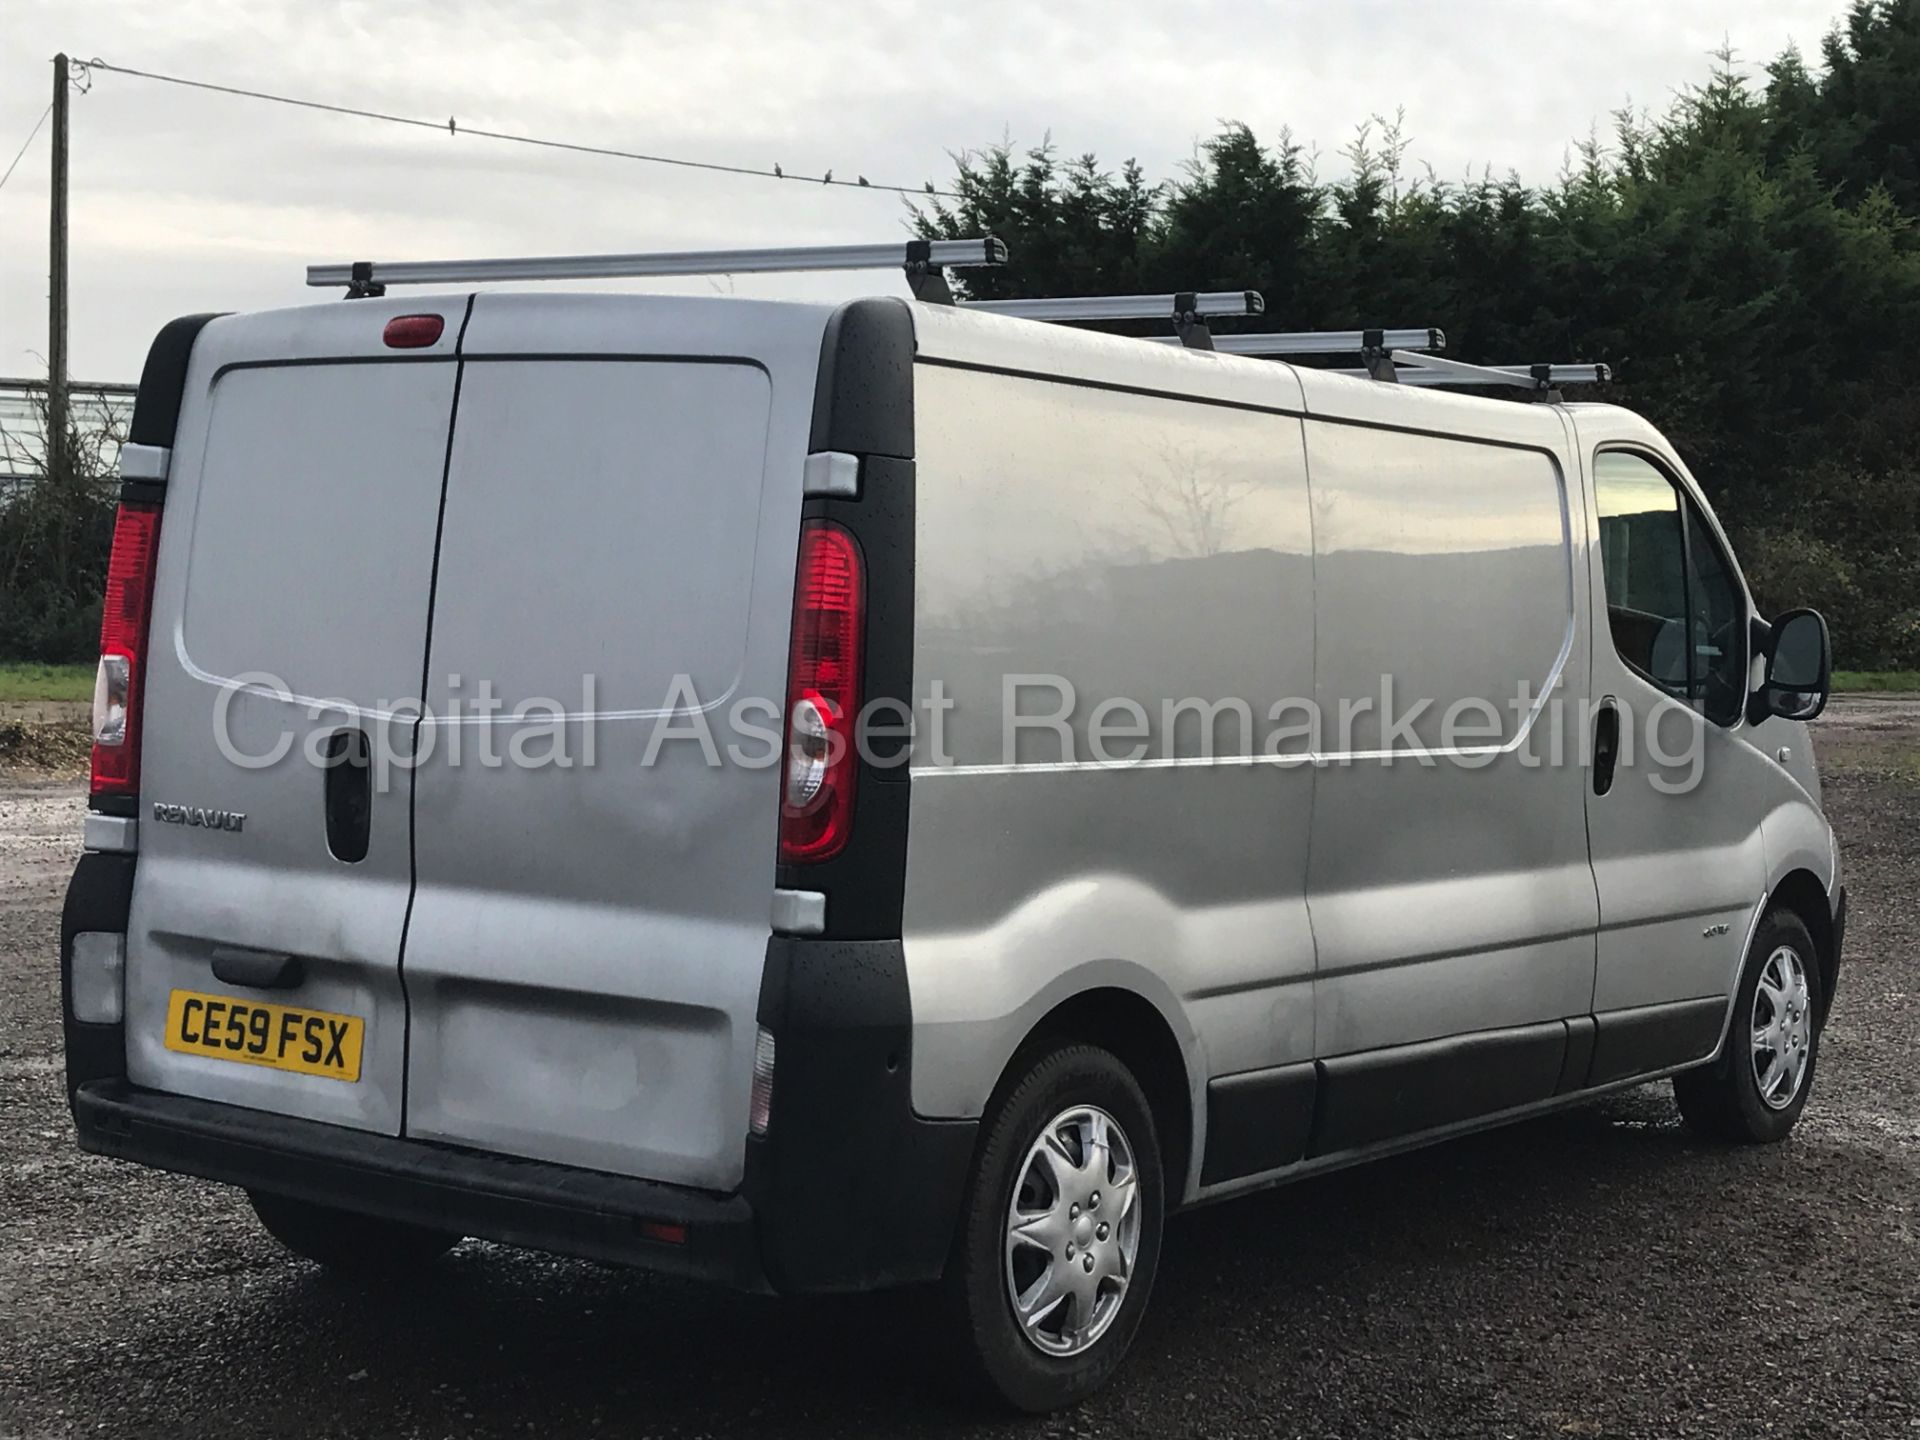 RENAULT TRAFIC LL29 DCI 115 (2010 MODEL) '2.0 DCI - 115 PS - 6 SPEED - LWB' **AIR CON** - Image 8 of 20